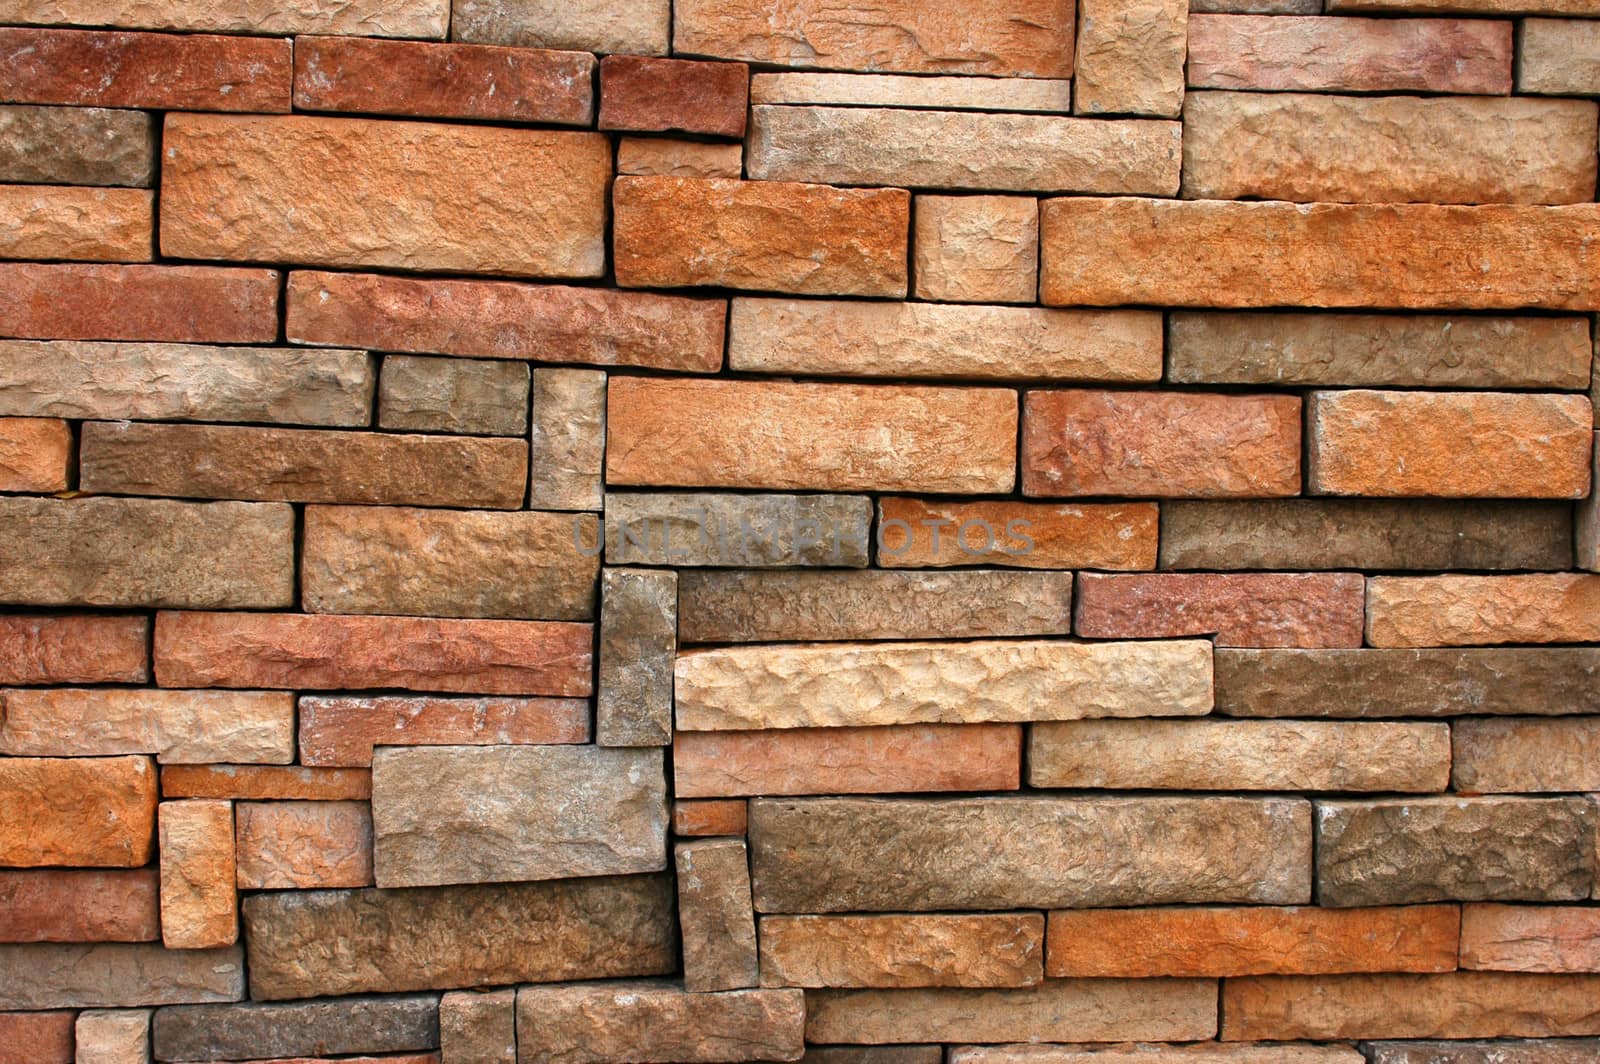 Background Texture Of A Wall With Uneven Bricks